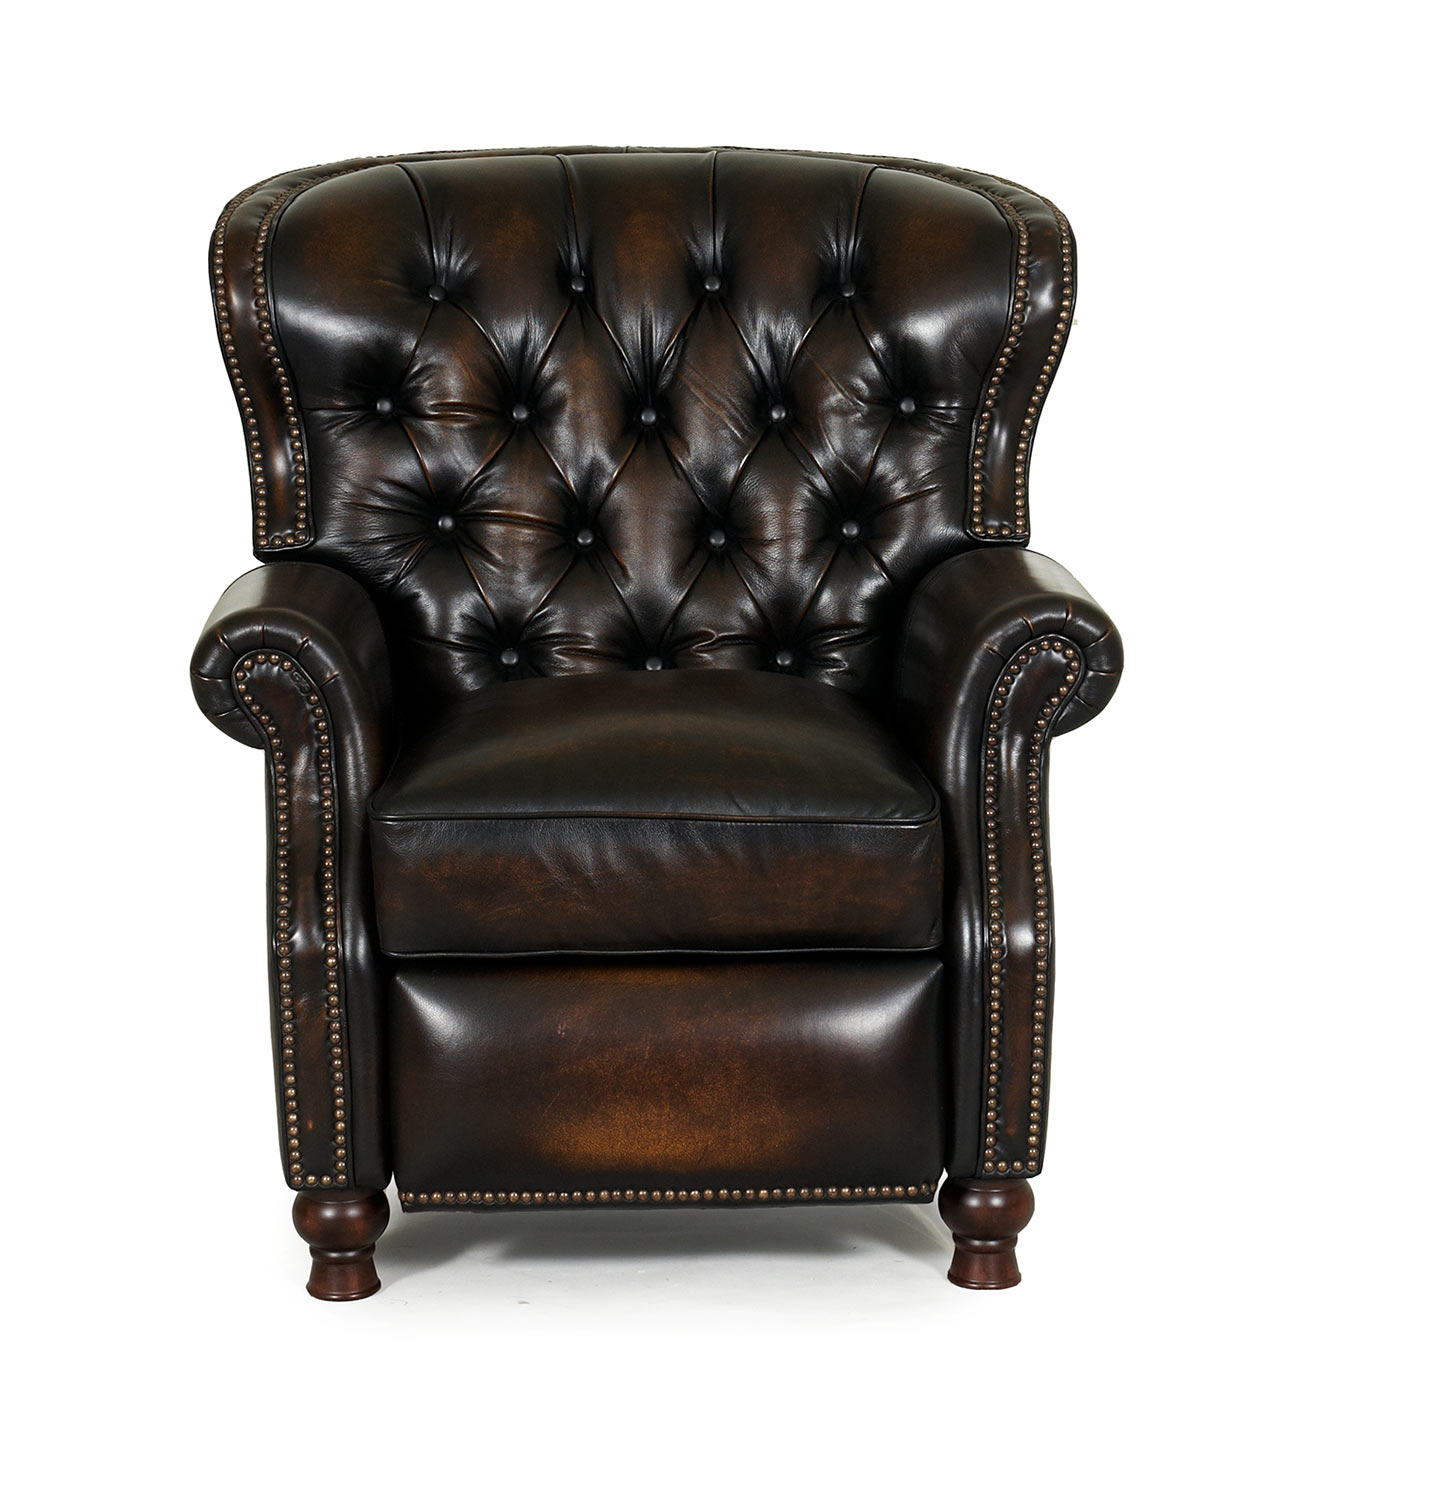 Barcalounger Presidential Power Recliner Chair - Stetson Coffee/All Leather